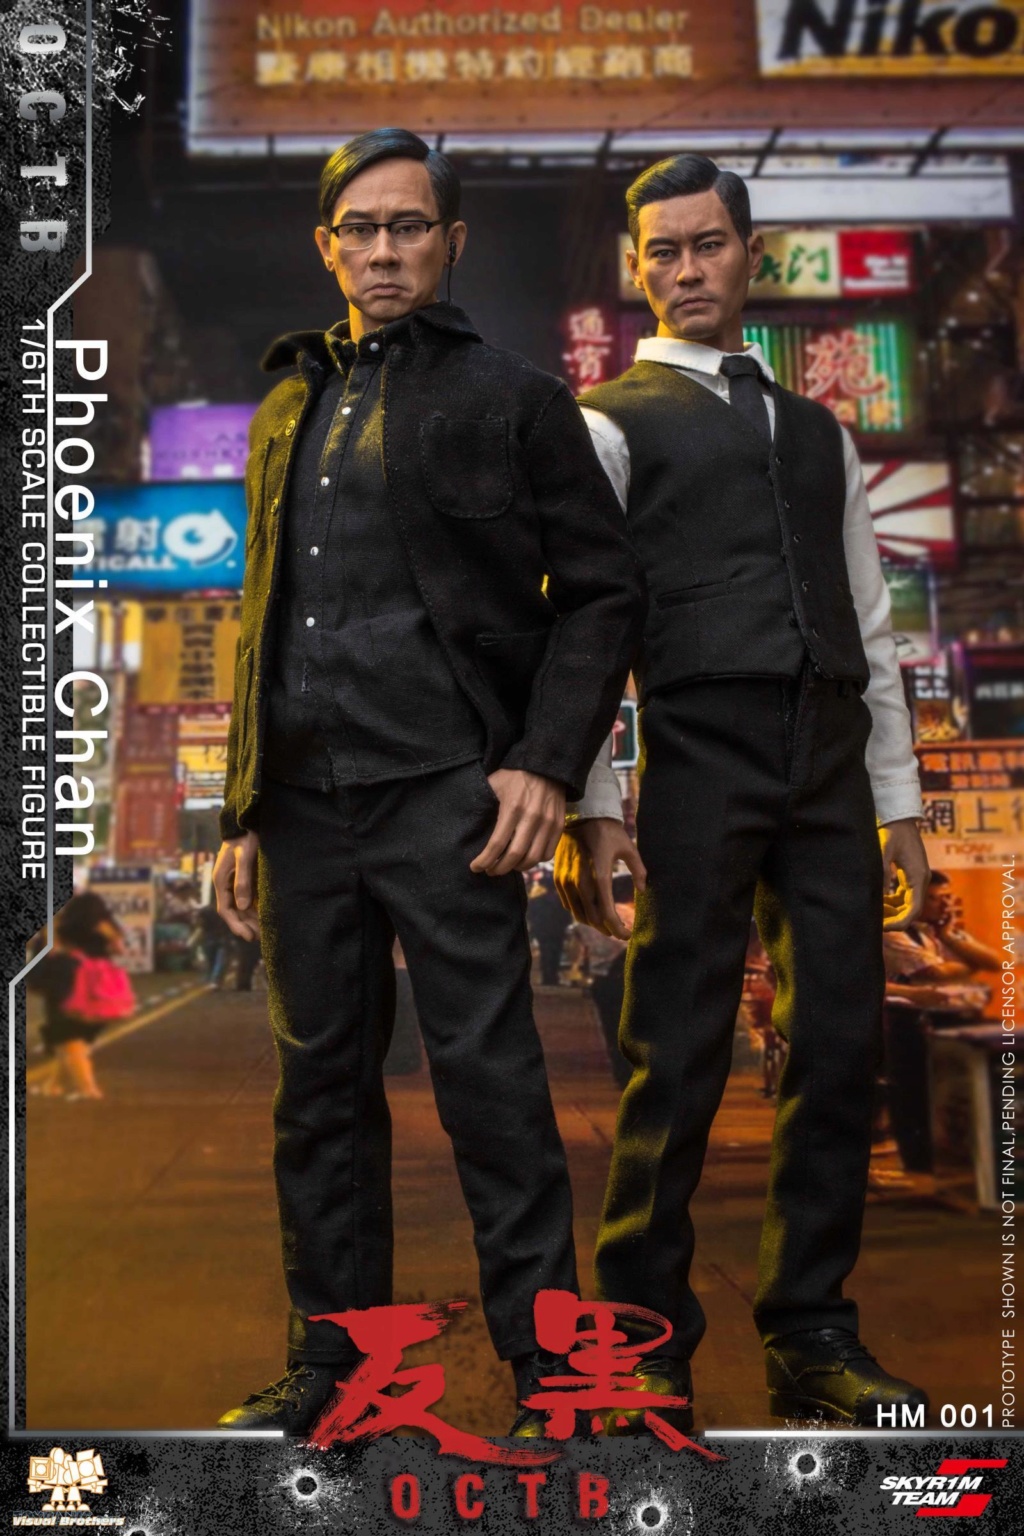 movie - NEW PRODUCT: Skyr1m Team: 1/6 scale OCTB Phoenix Chan Action Figure (HM001) 322